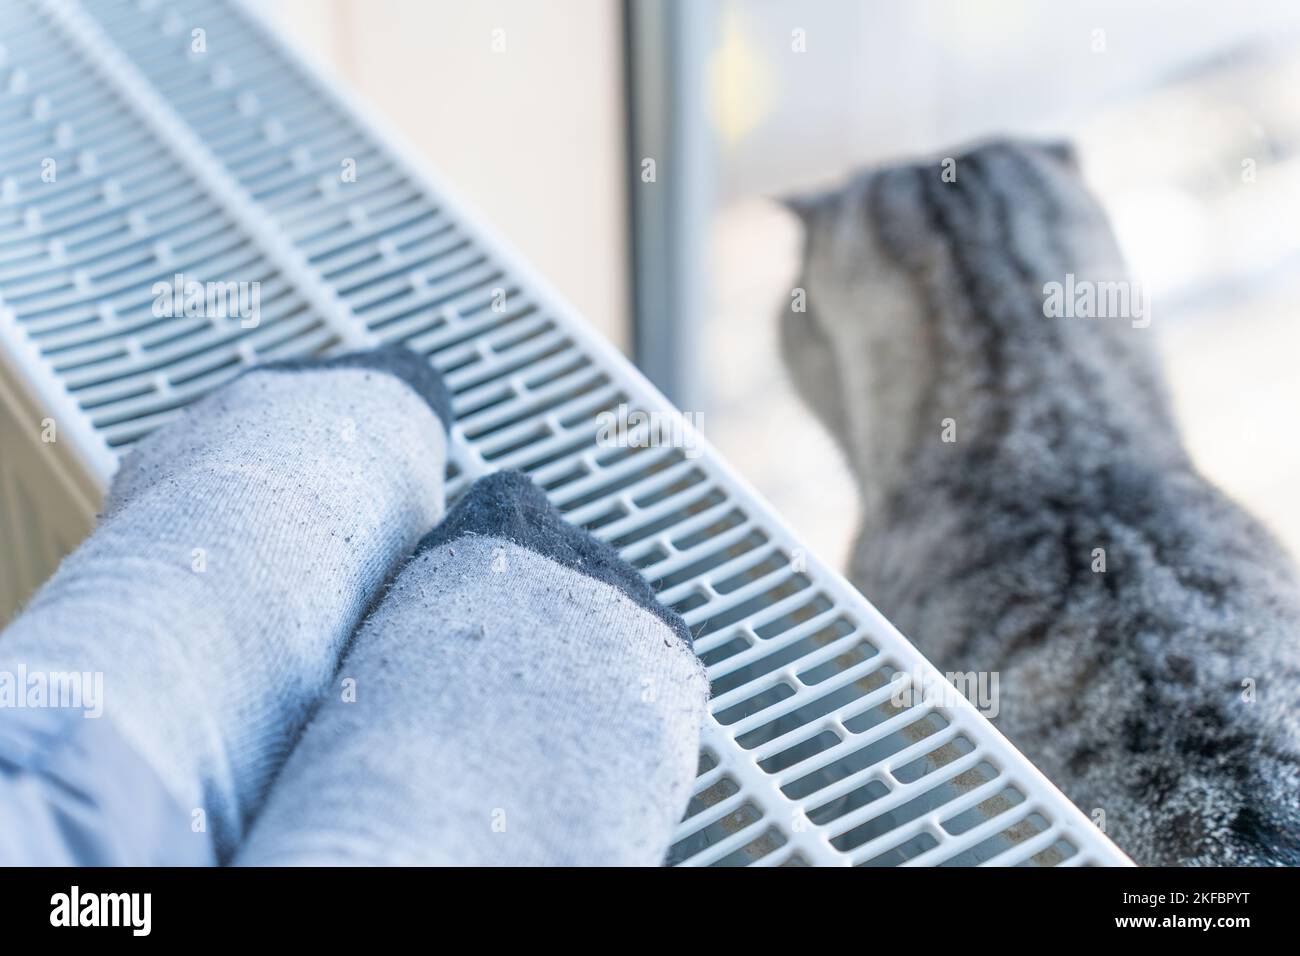 A woman warms her feet on the Heater, a cat sits next to her and looks out the window. Stock Photo